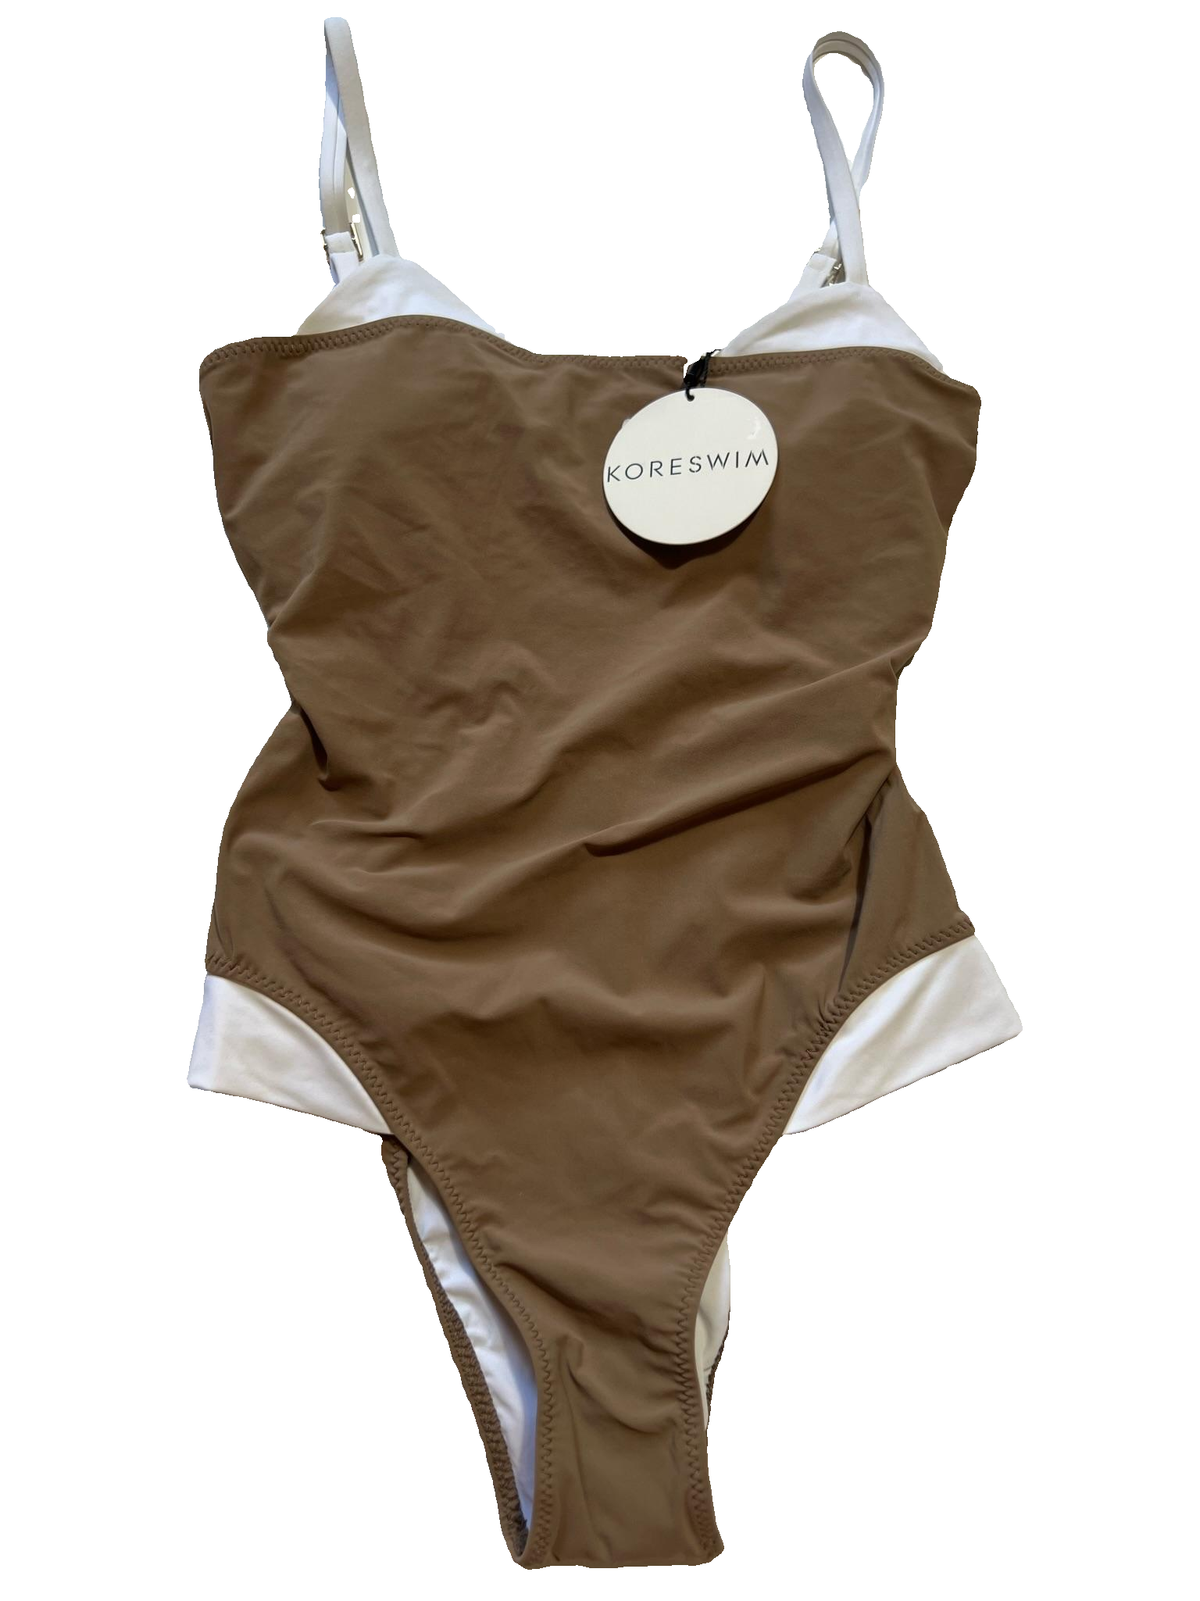 Koreswim - Brown and White Colorblock One Piece - NEW WITH TAGS